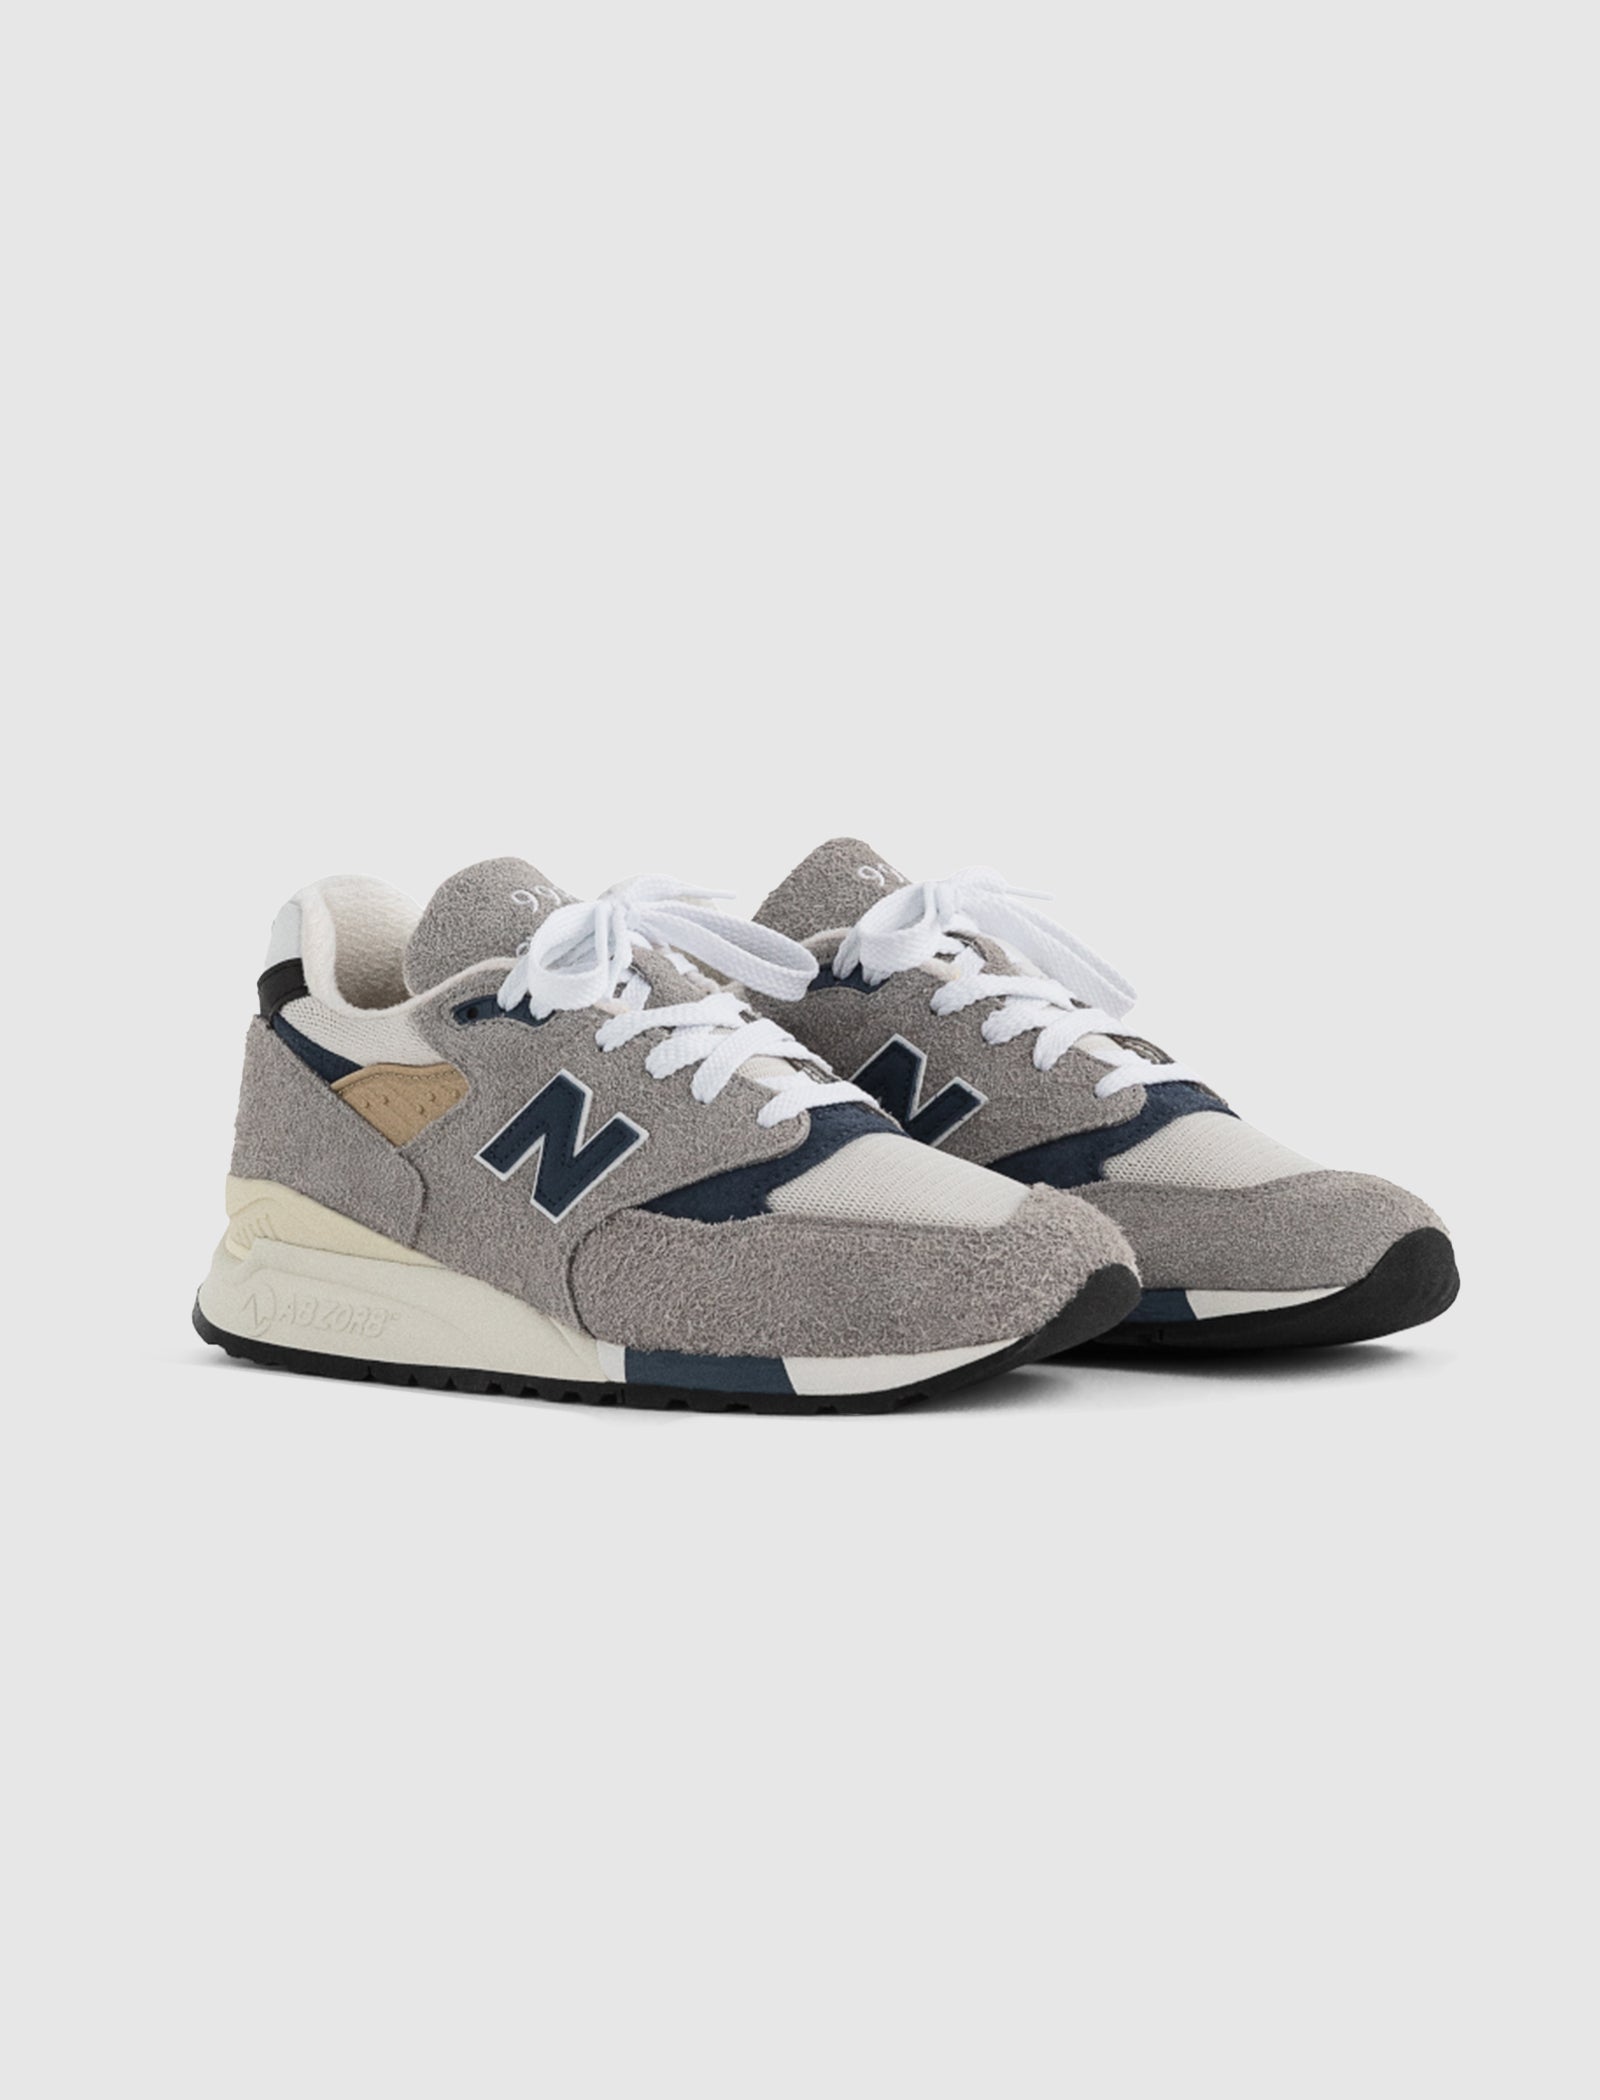 MADE IN USA 998 "GREY/NAVY"